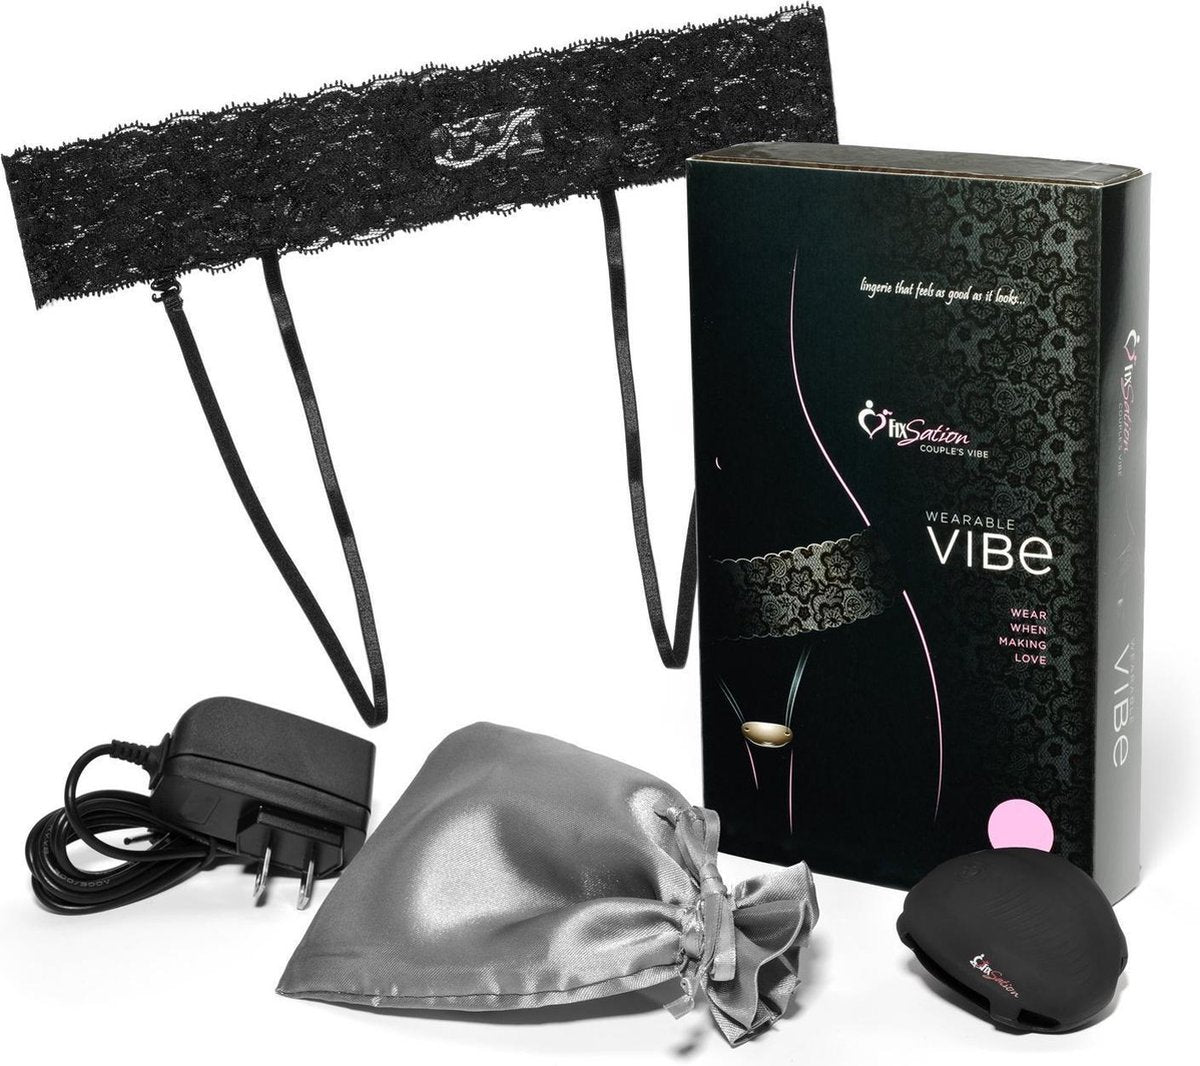 Fixsation – Couples Panty Vibe - Panty Vibrator - Rechargeable - For Couples - Wtih Case - Very nice package - Size XL